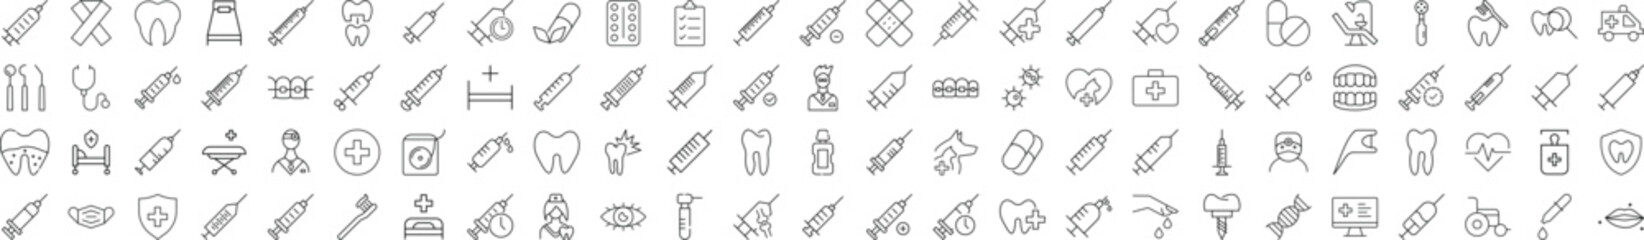 Medicine, Clinic, Doctor Outline Linear Icons of Thin Line. Illustrations for web sites, apps, design, banners and other purposes